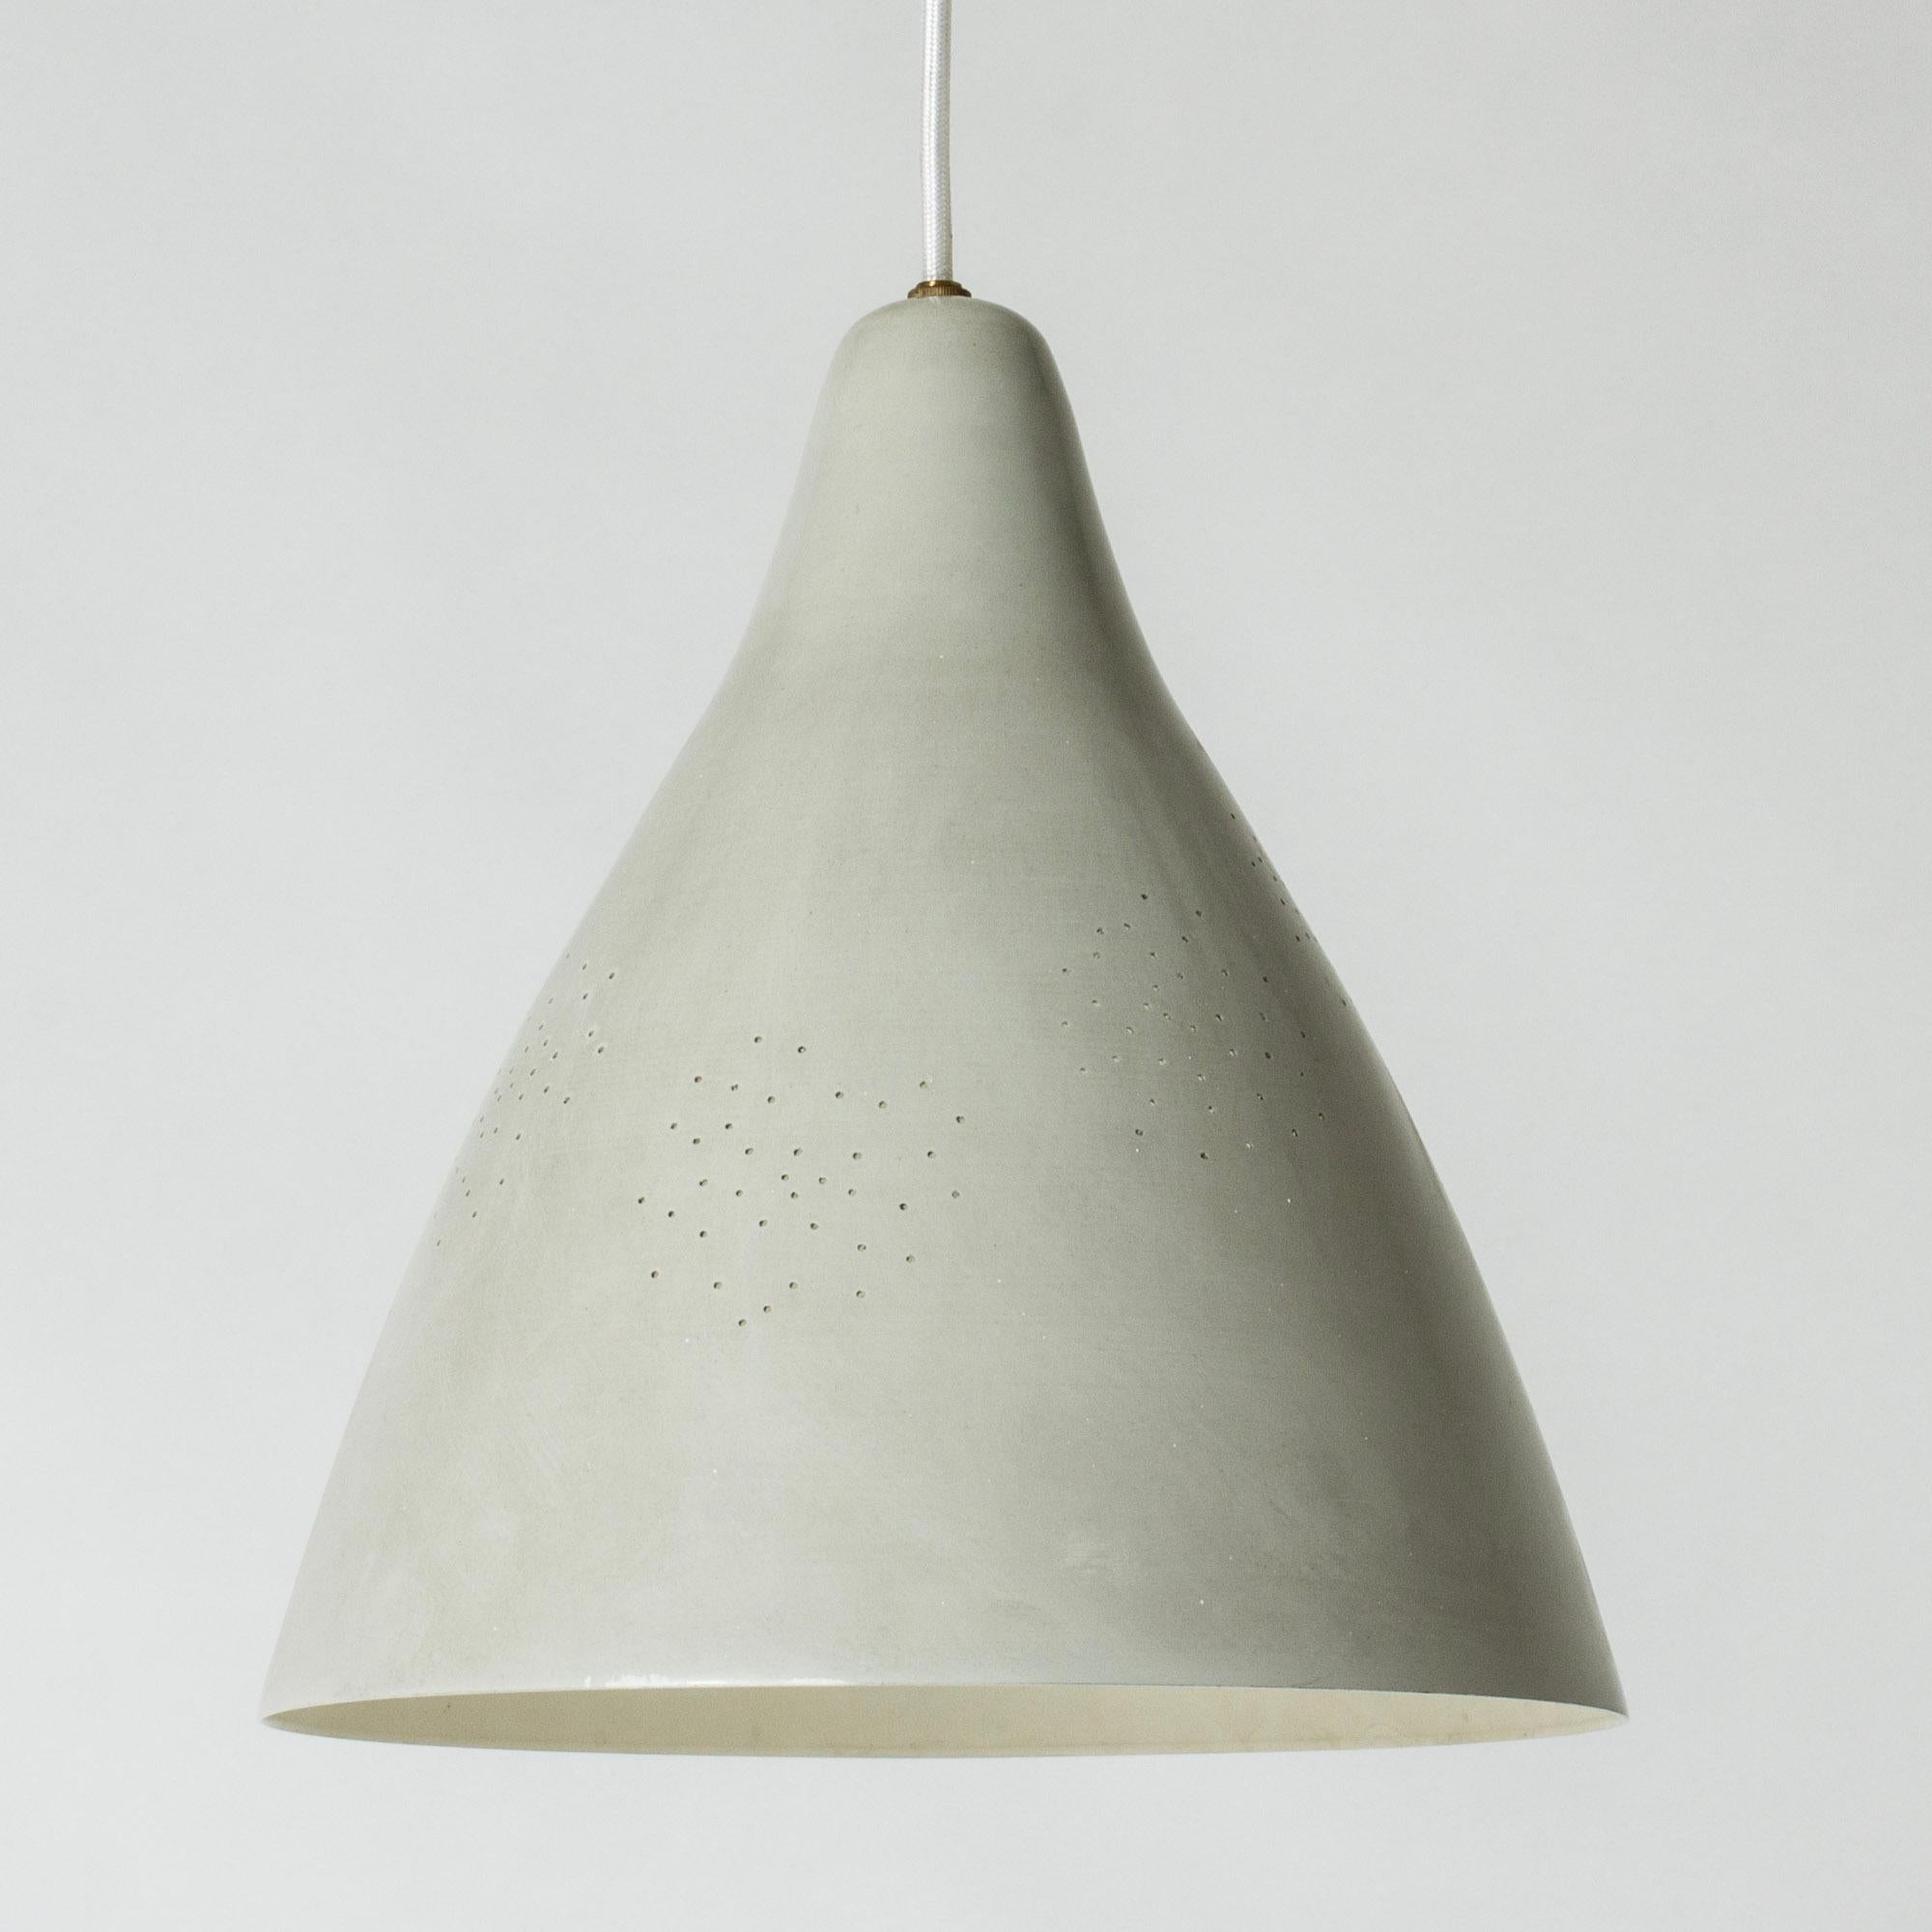 Sleek ceiling light by Lisa Johansson-Pape, made from grey lacquered metal. Voluminous form perforated with small holes that let the light out in a lovely way.